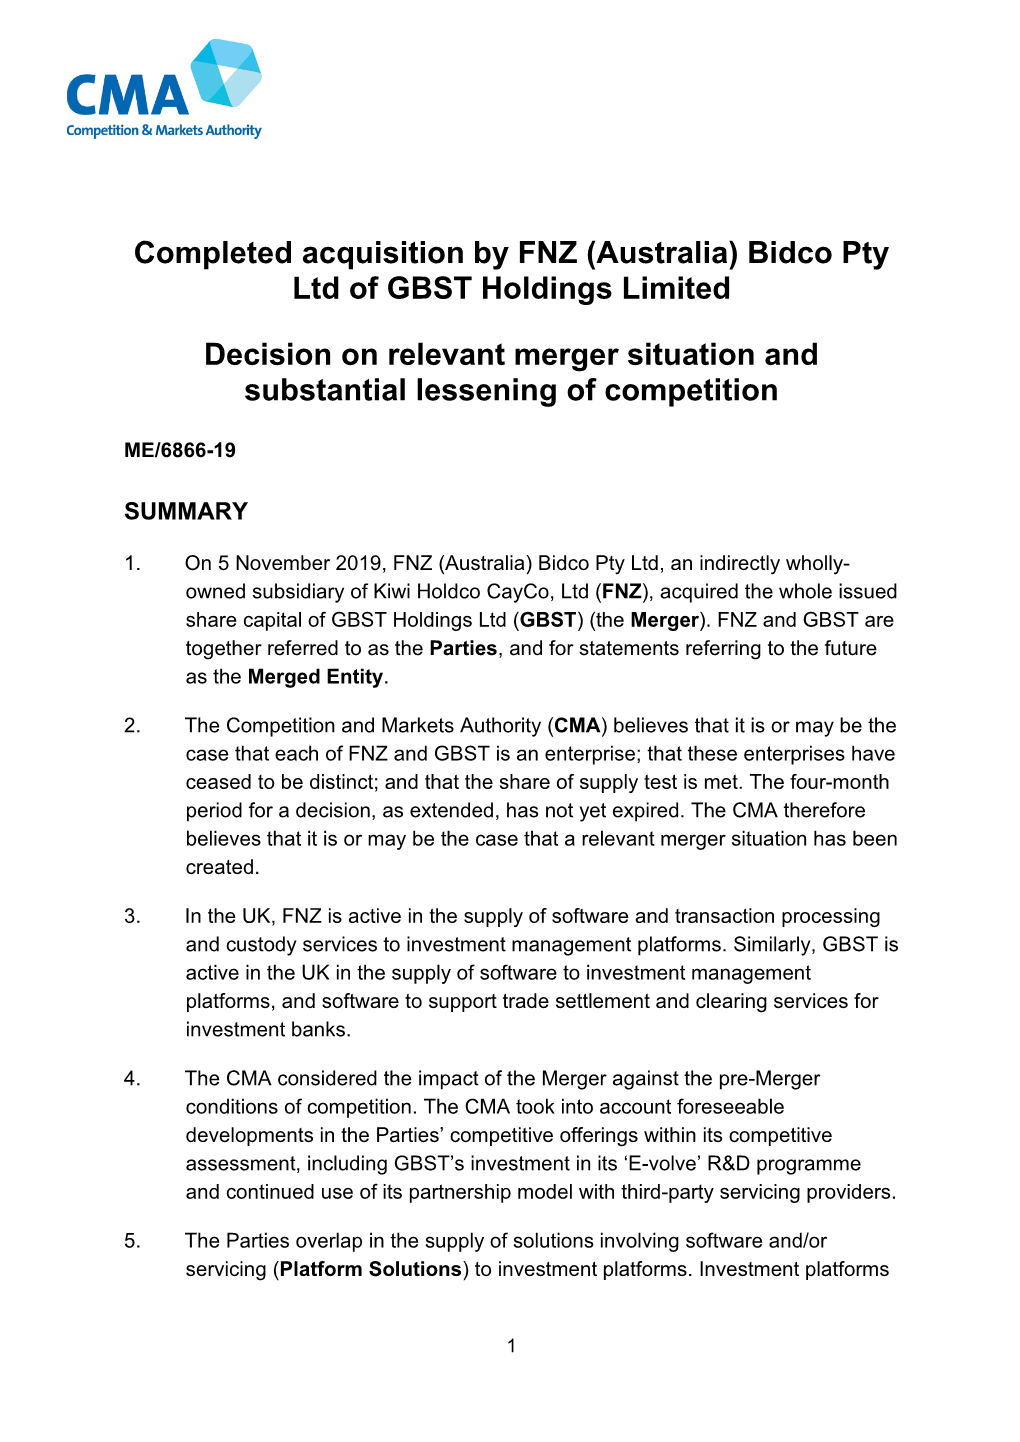 Completed Acquisition by FNZ (Australia) Bidco Pty Ltd of GBST Holdings Limited Decision on Relevant Merger Situation and Substantial Lessening of Competition